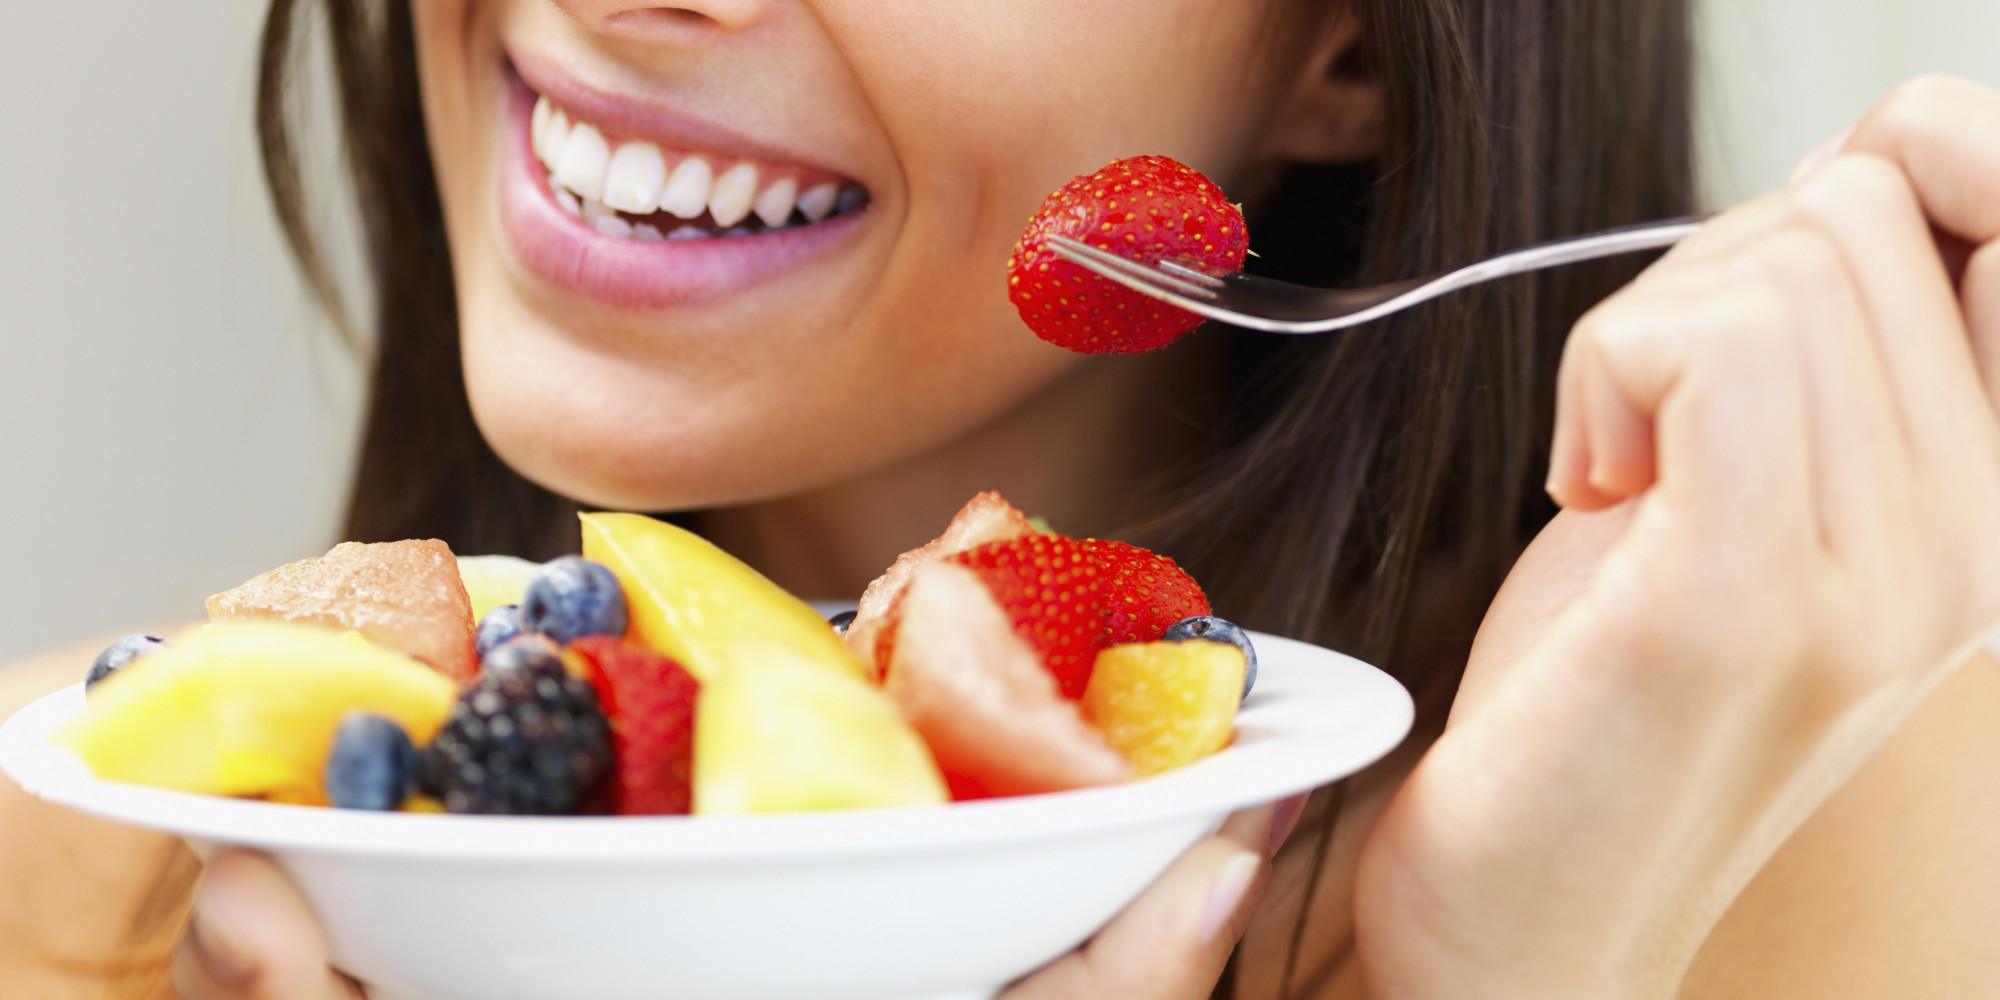 #HealthyEating - The Importance Of Eating Healthy #Food #FrizeMedia